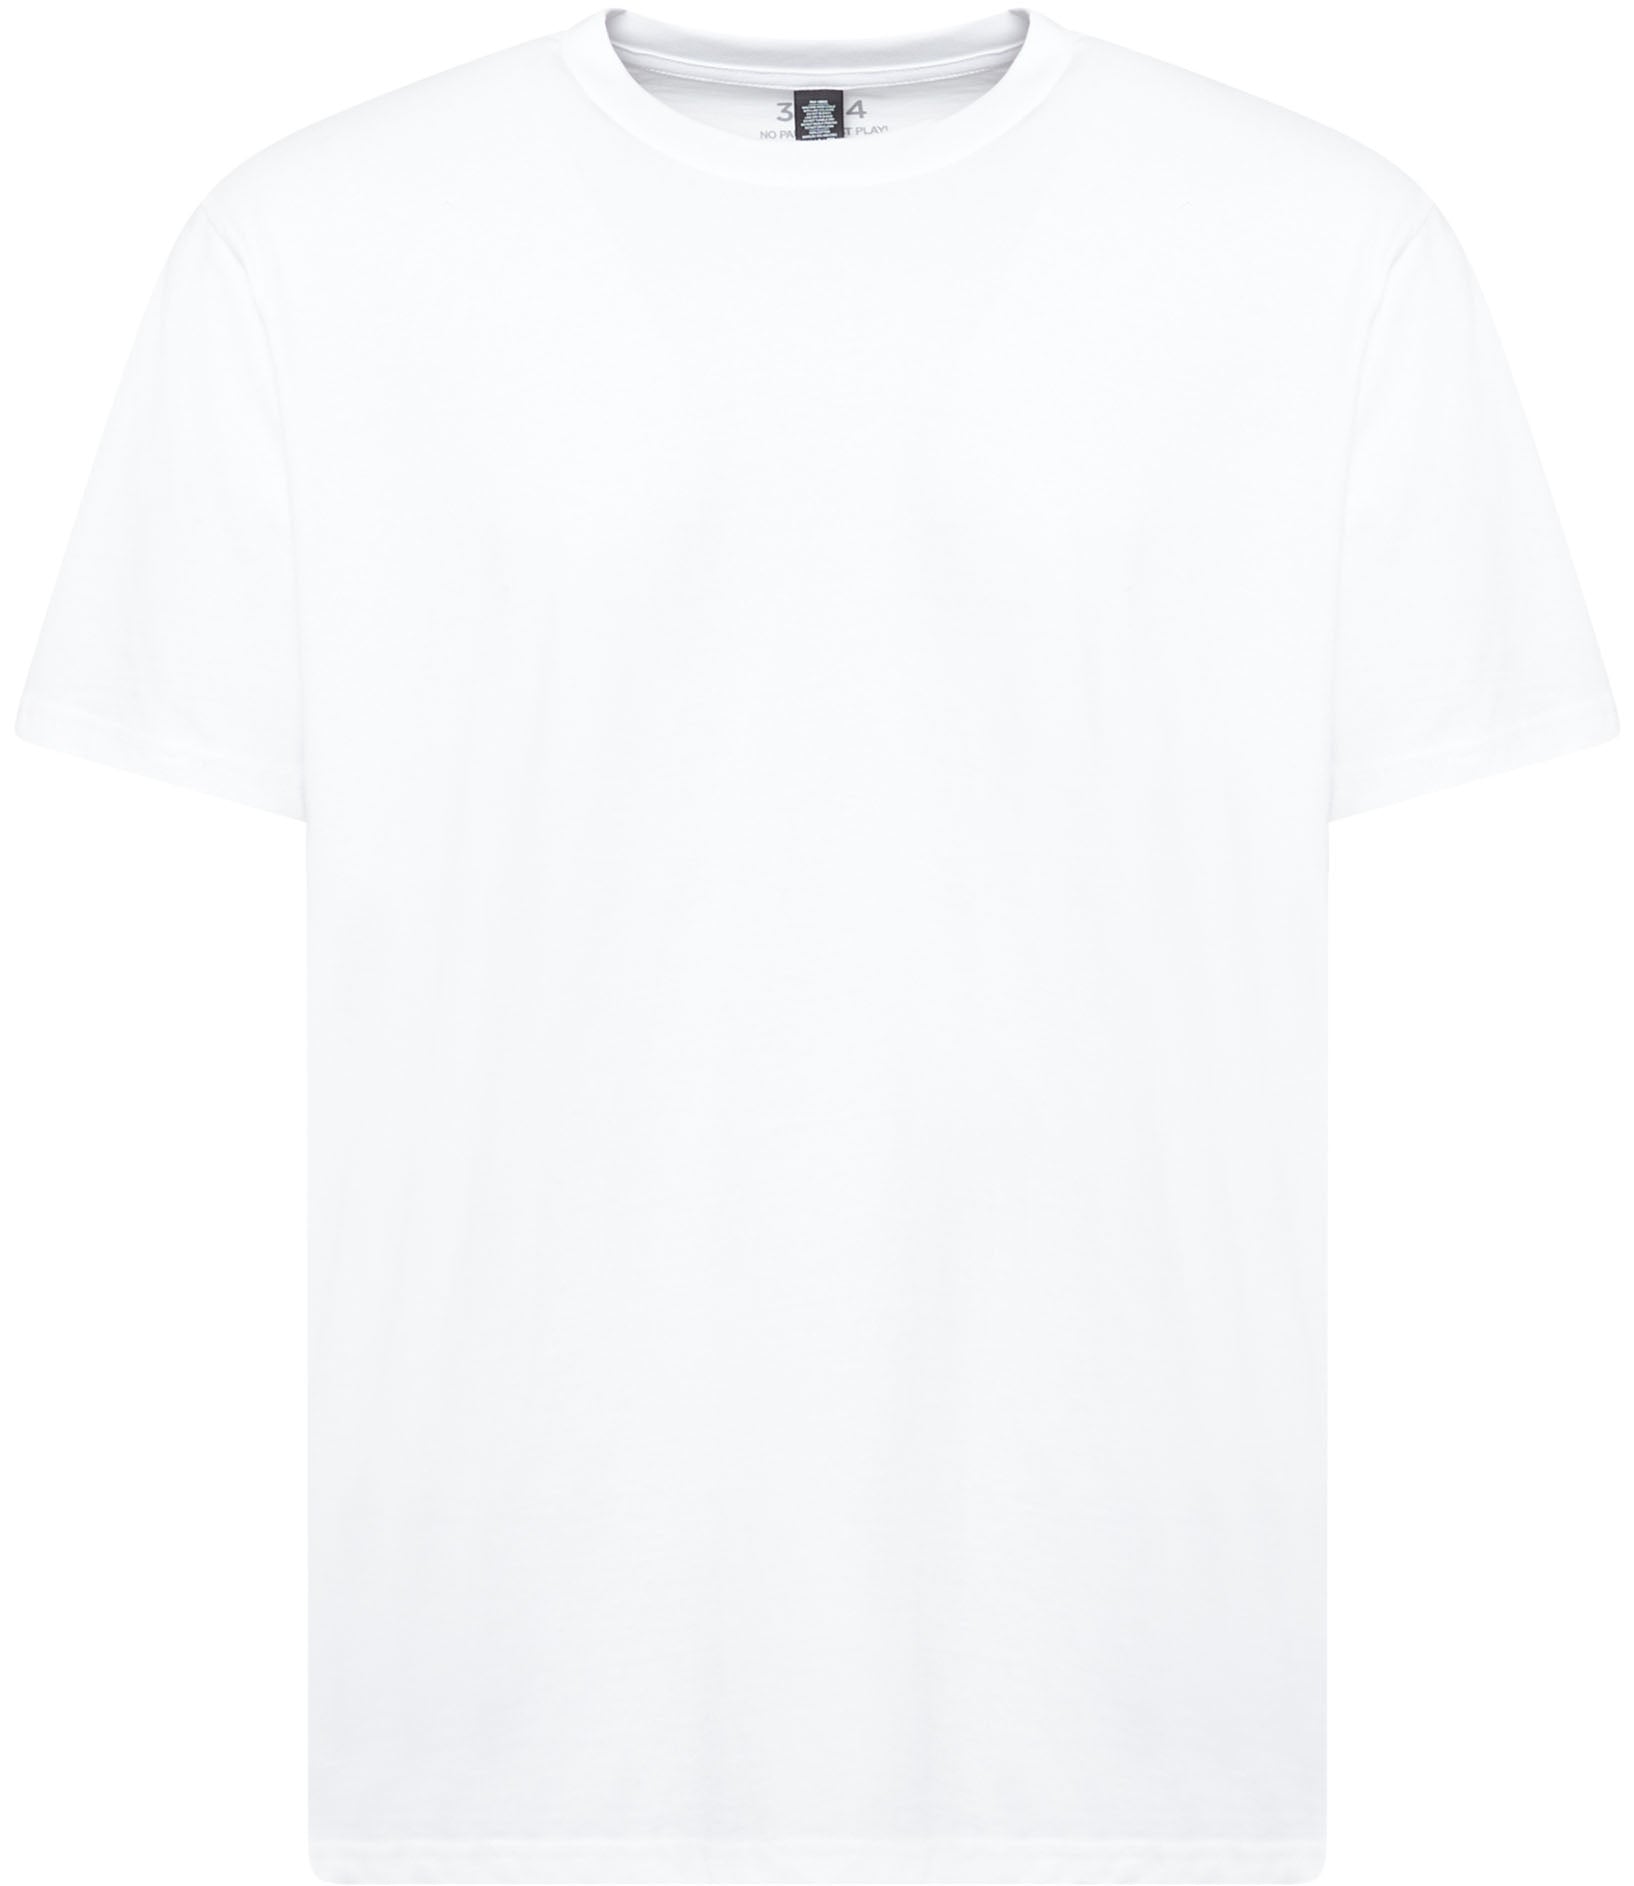 T-Shirt White Front